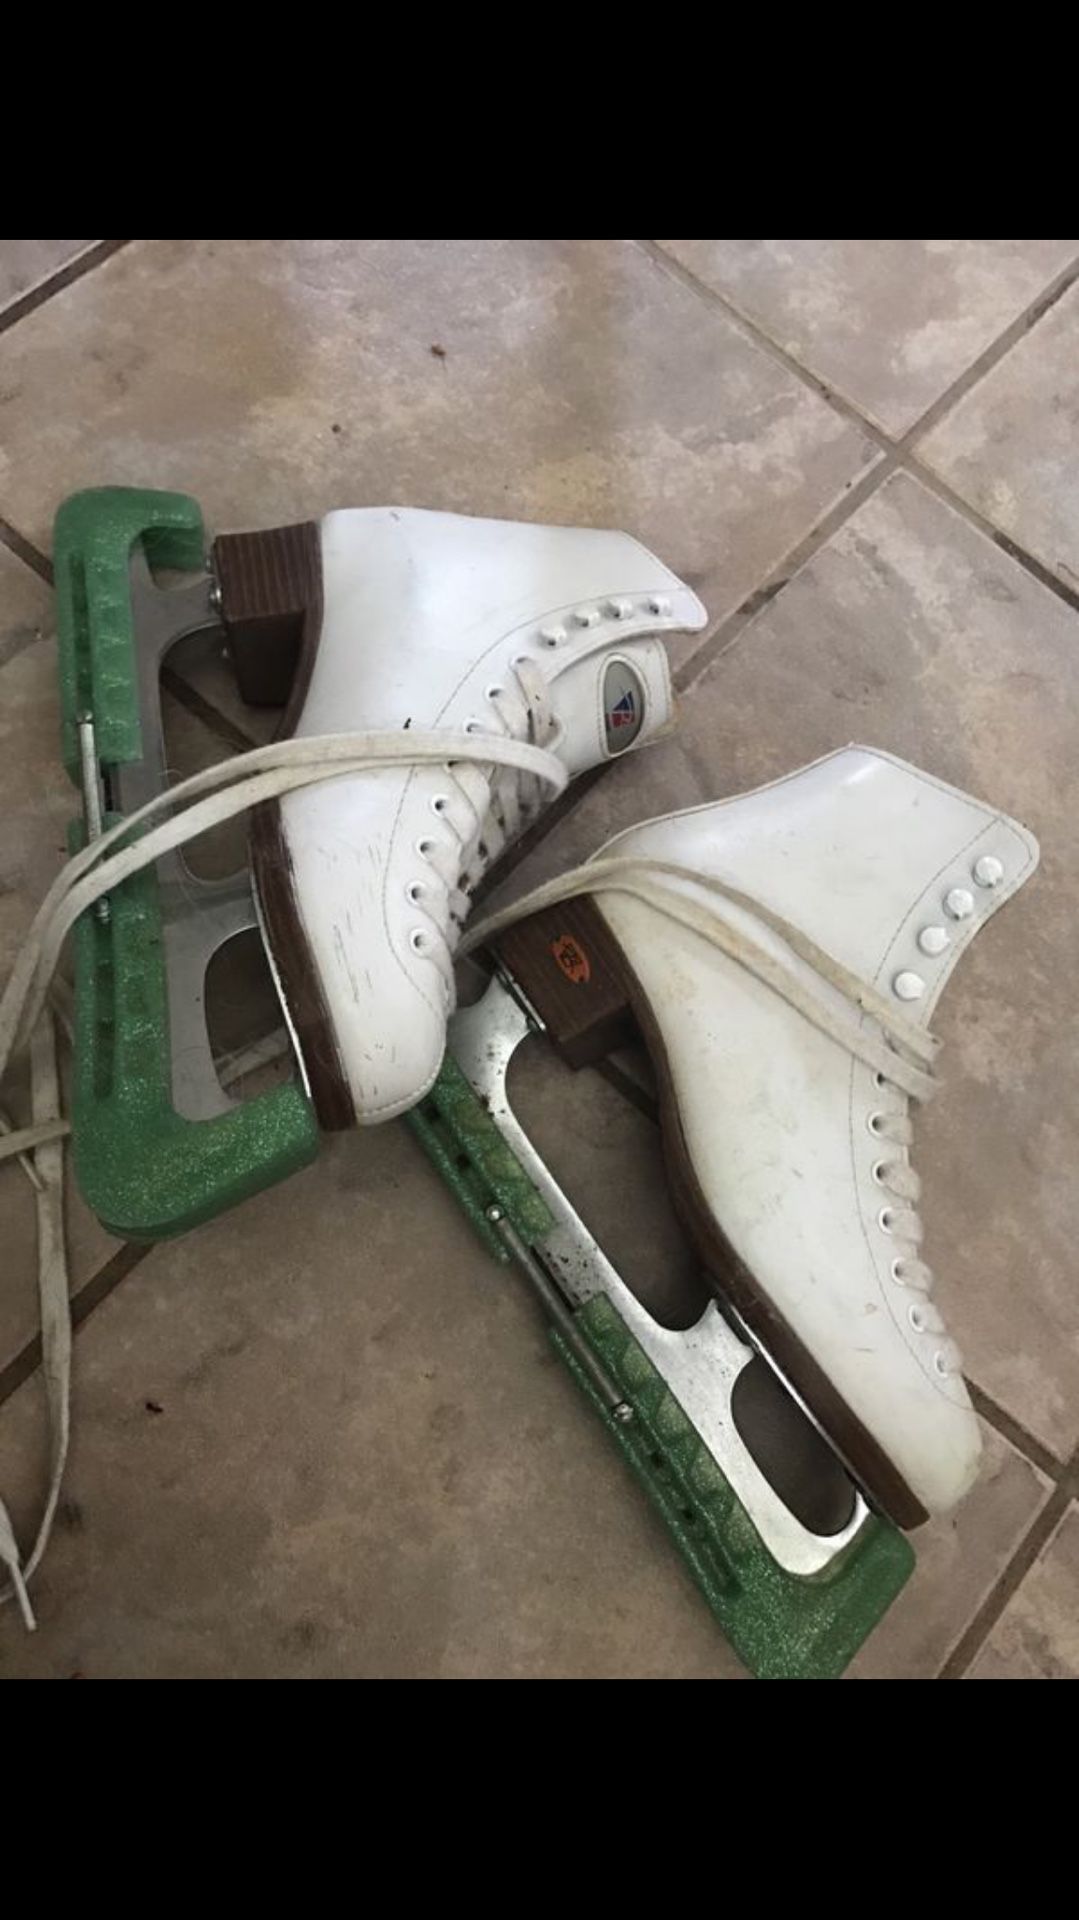 Ice skates riedell. Size 4